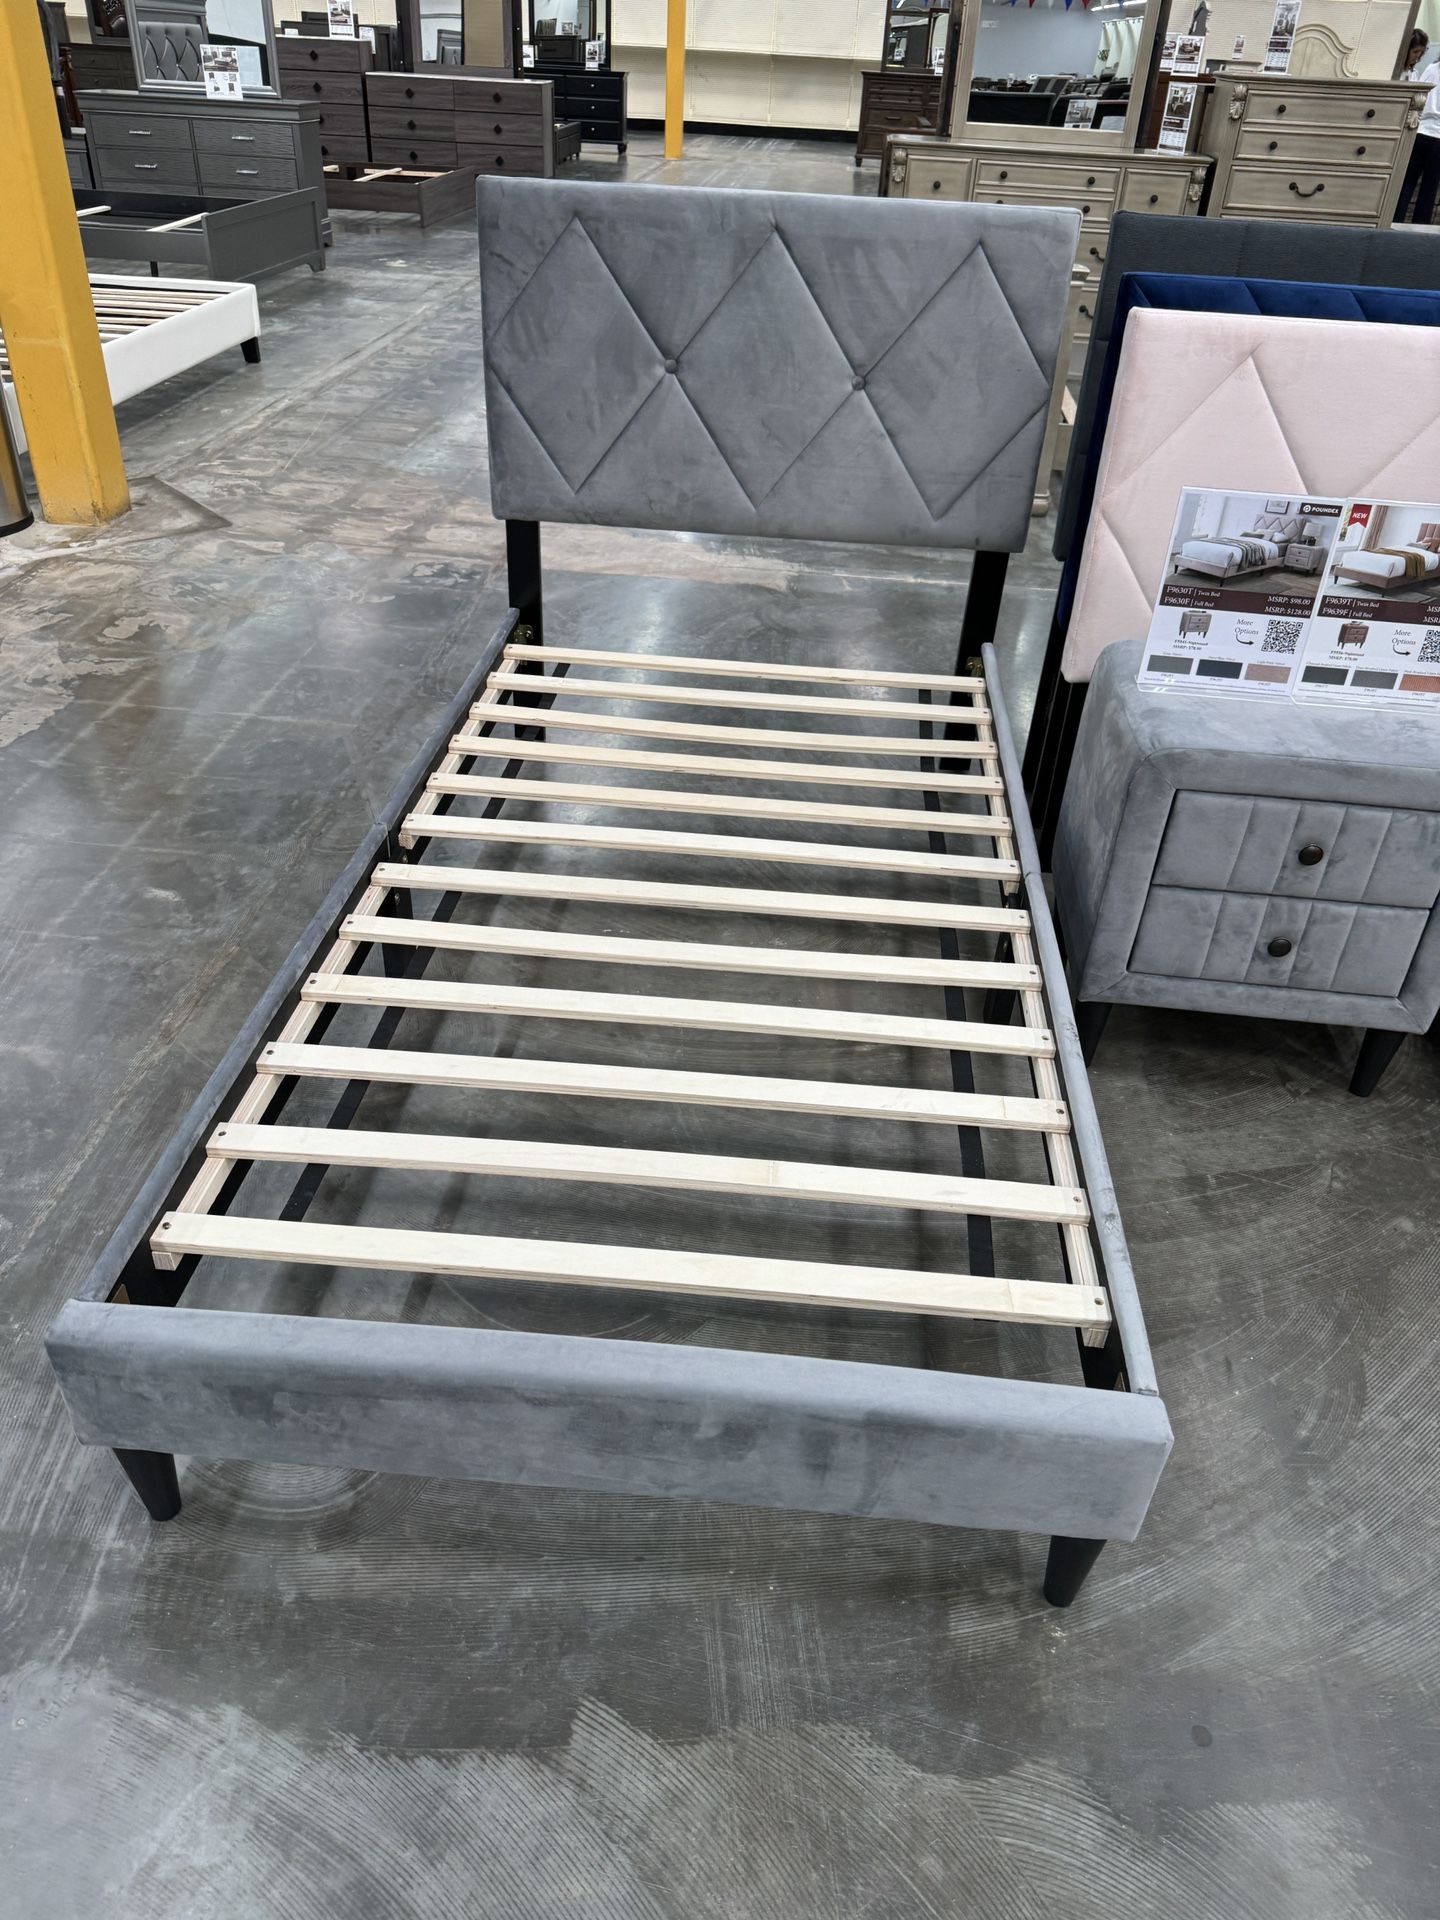 TWIN BED FRAMES FOR SALE 